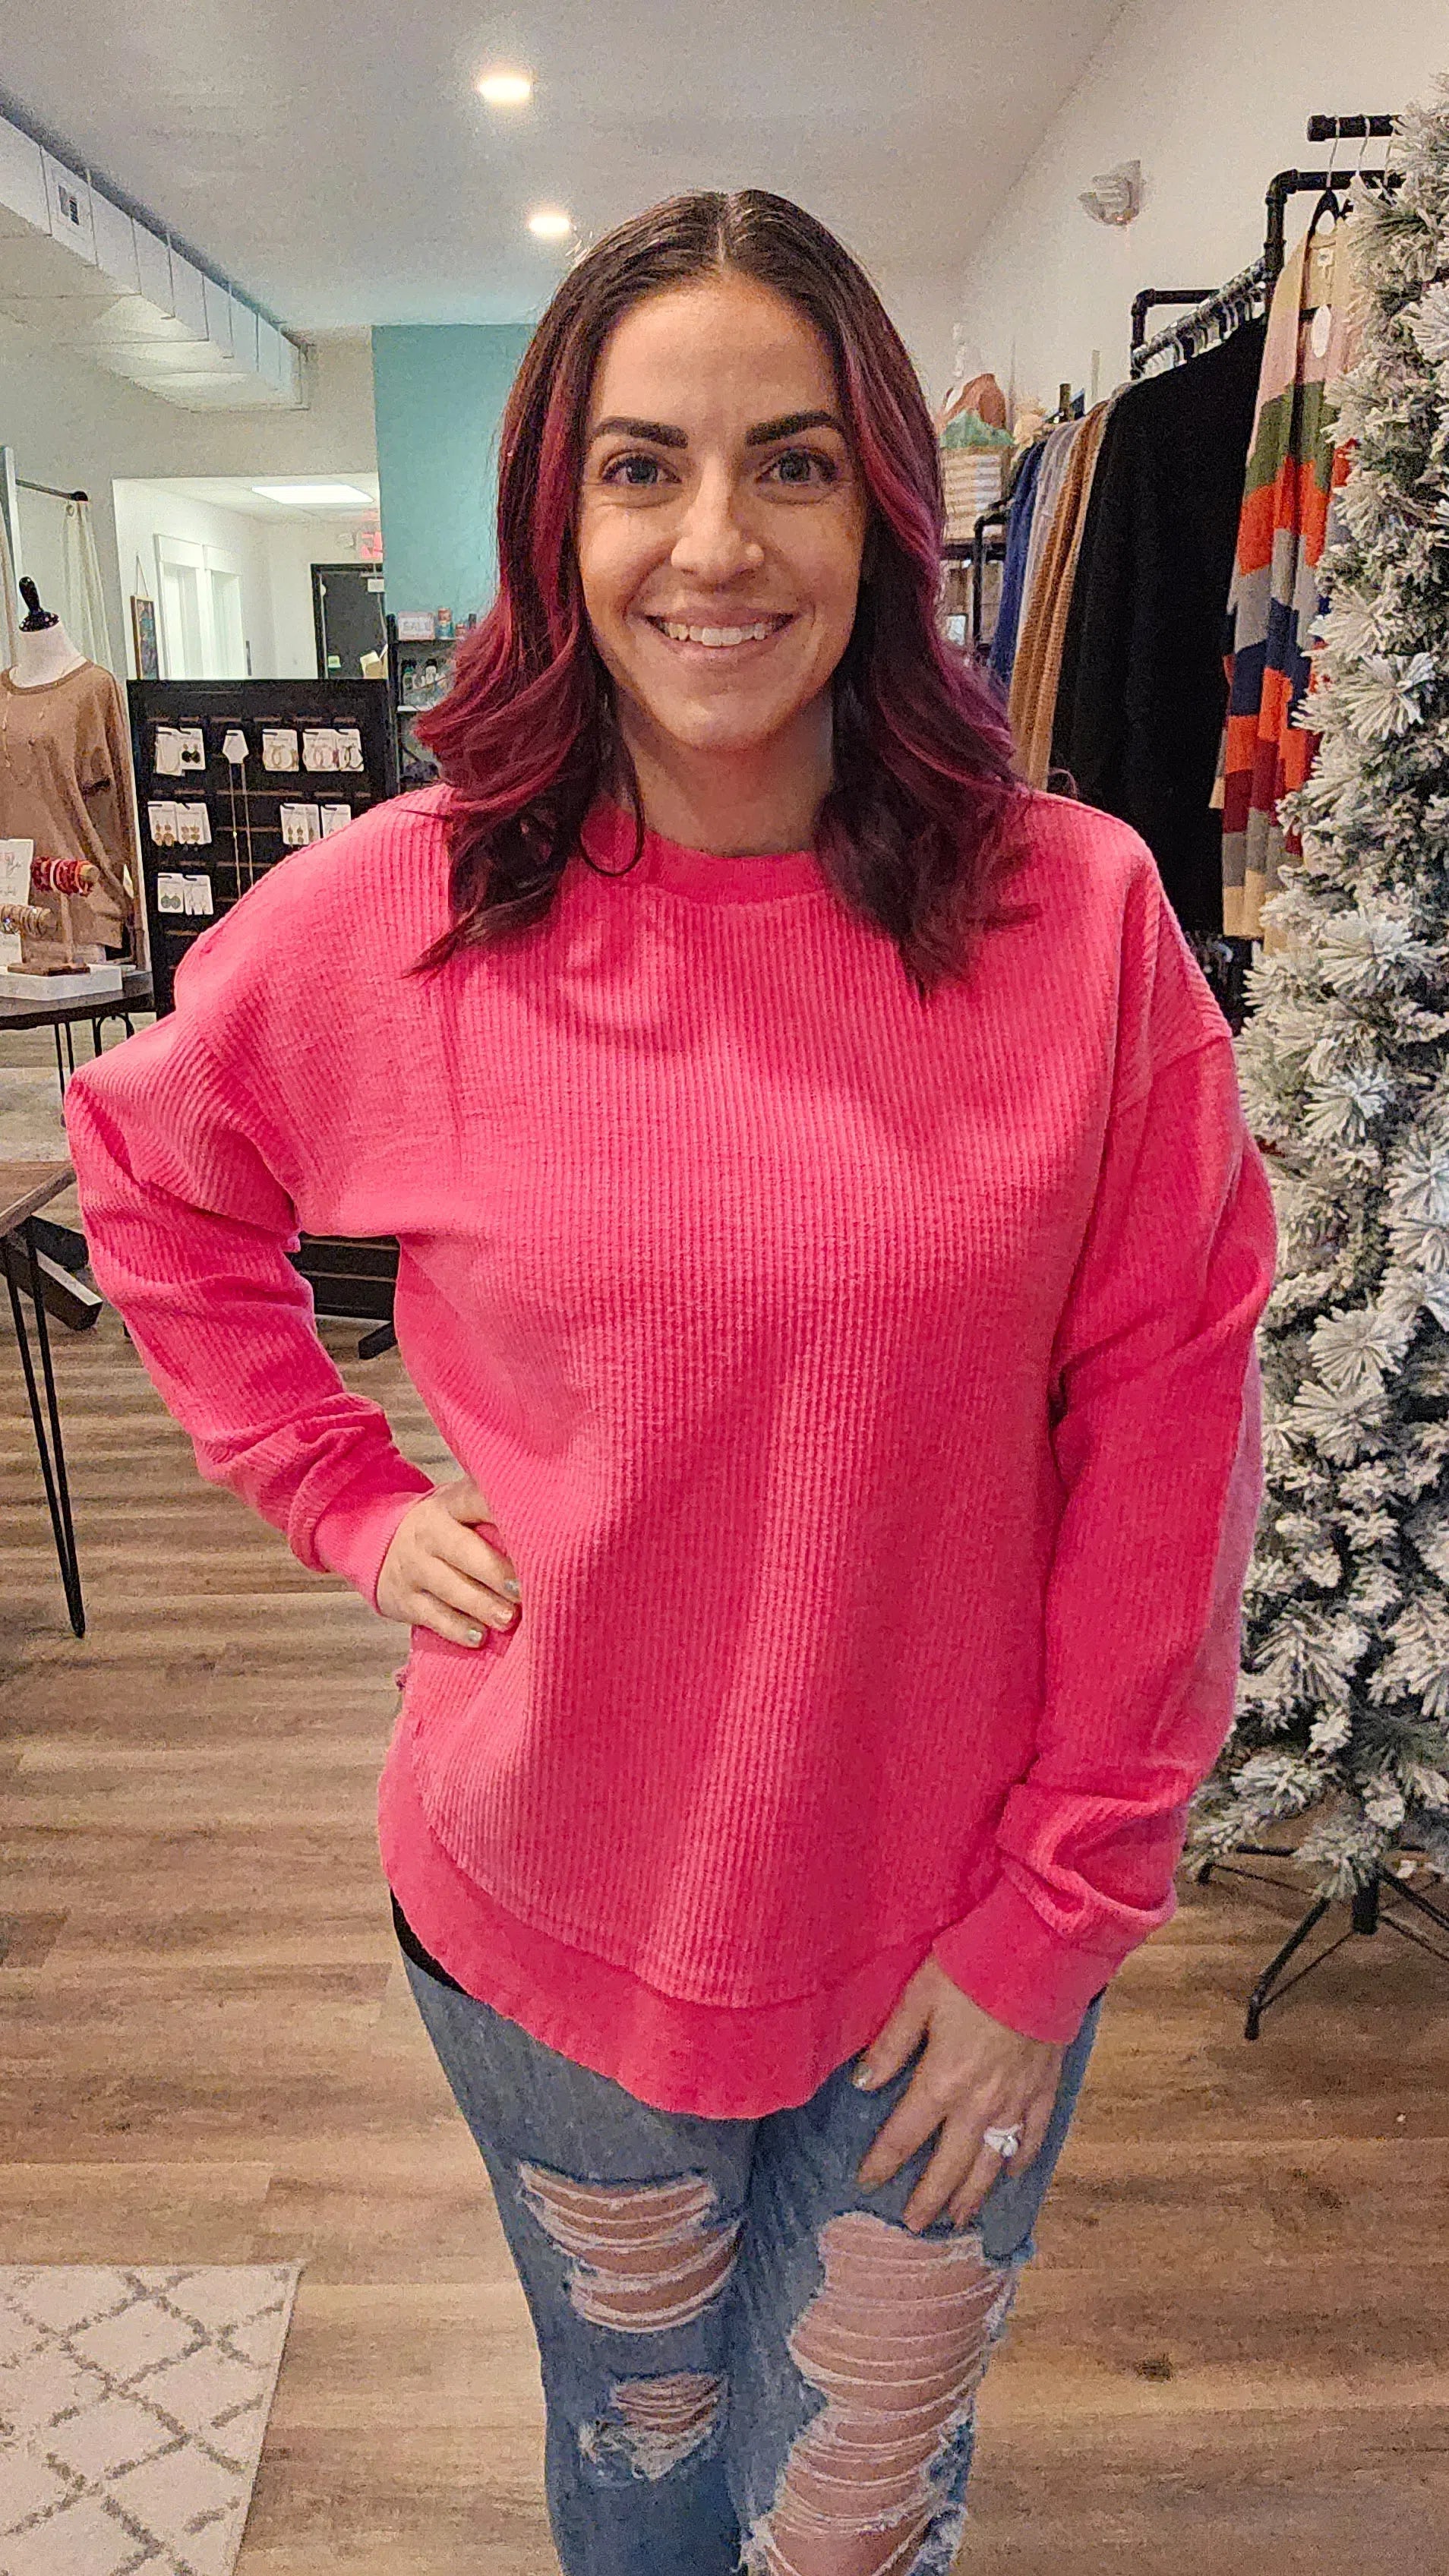 Shop Lexi Corded Crewneck Pullover - Hot Pink-sweatshirt at Ruby Joy Boutique, a Women's Clothing Store in Pickerington, Ohio